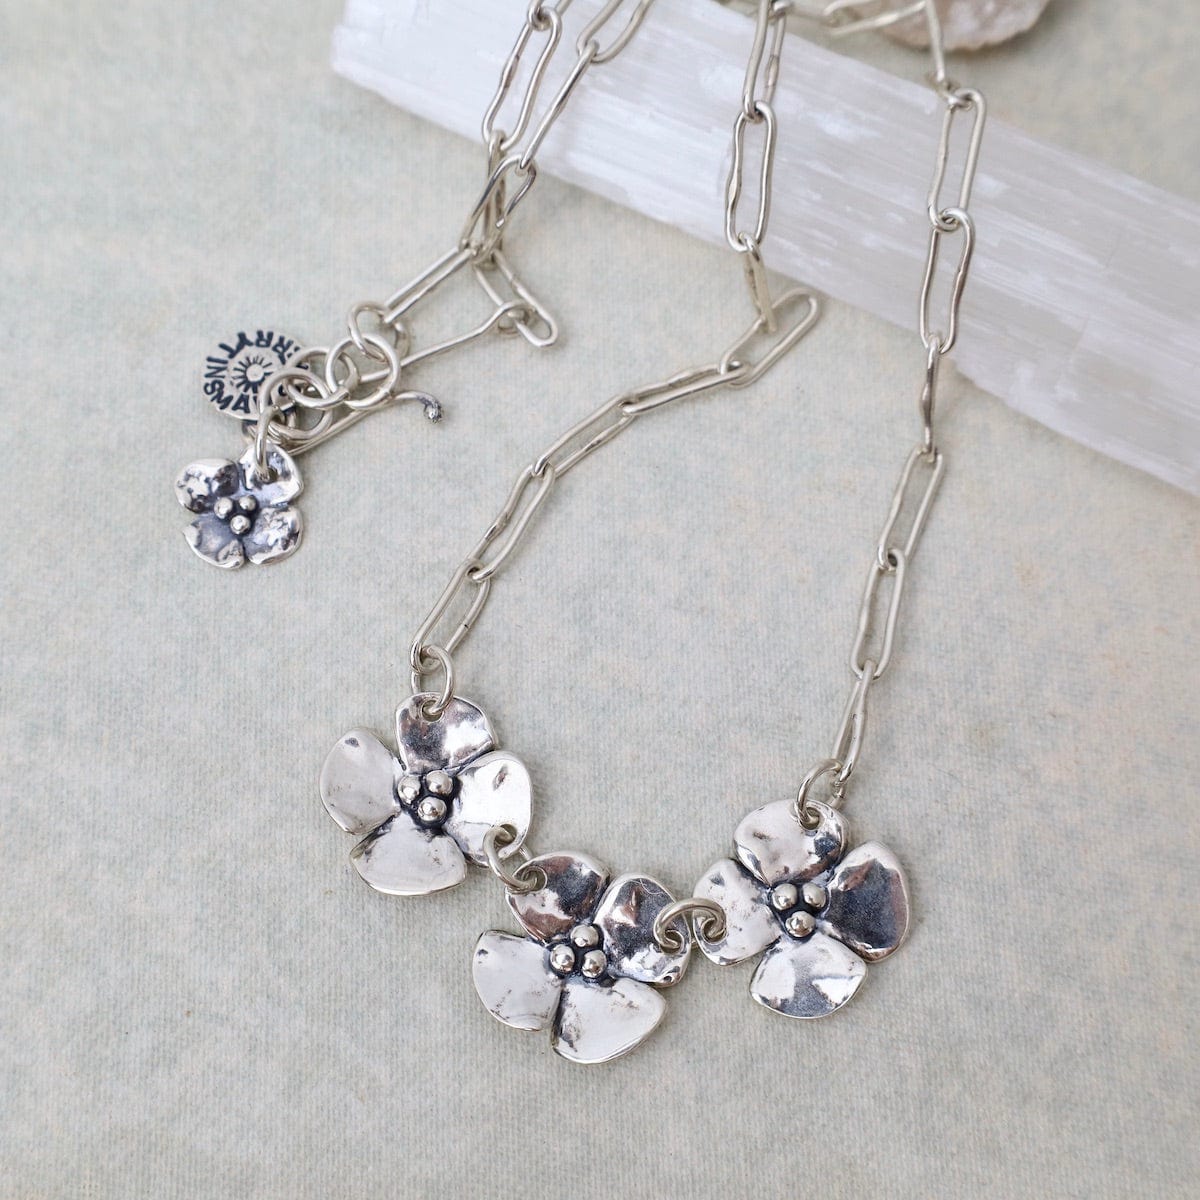 NKL Three Dogwood Flower Necklace on Short Oval Chain